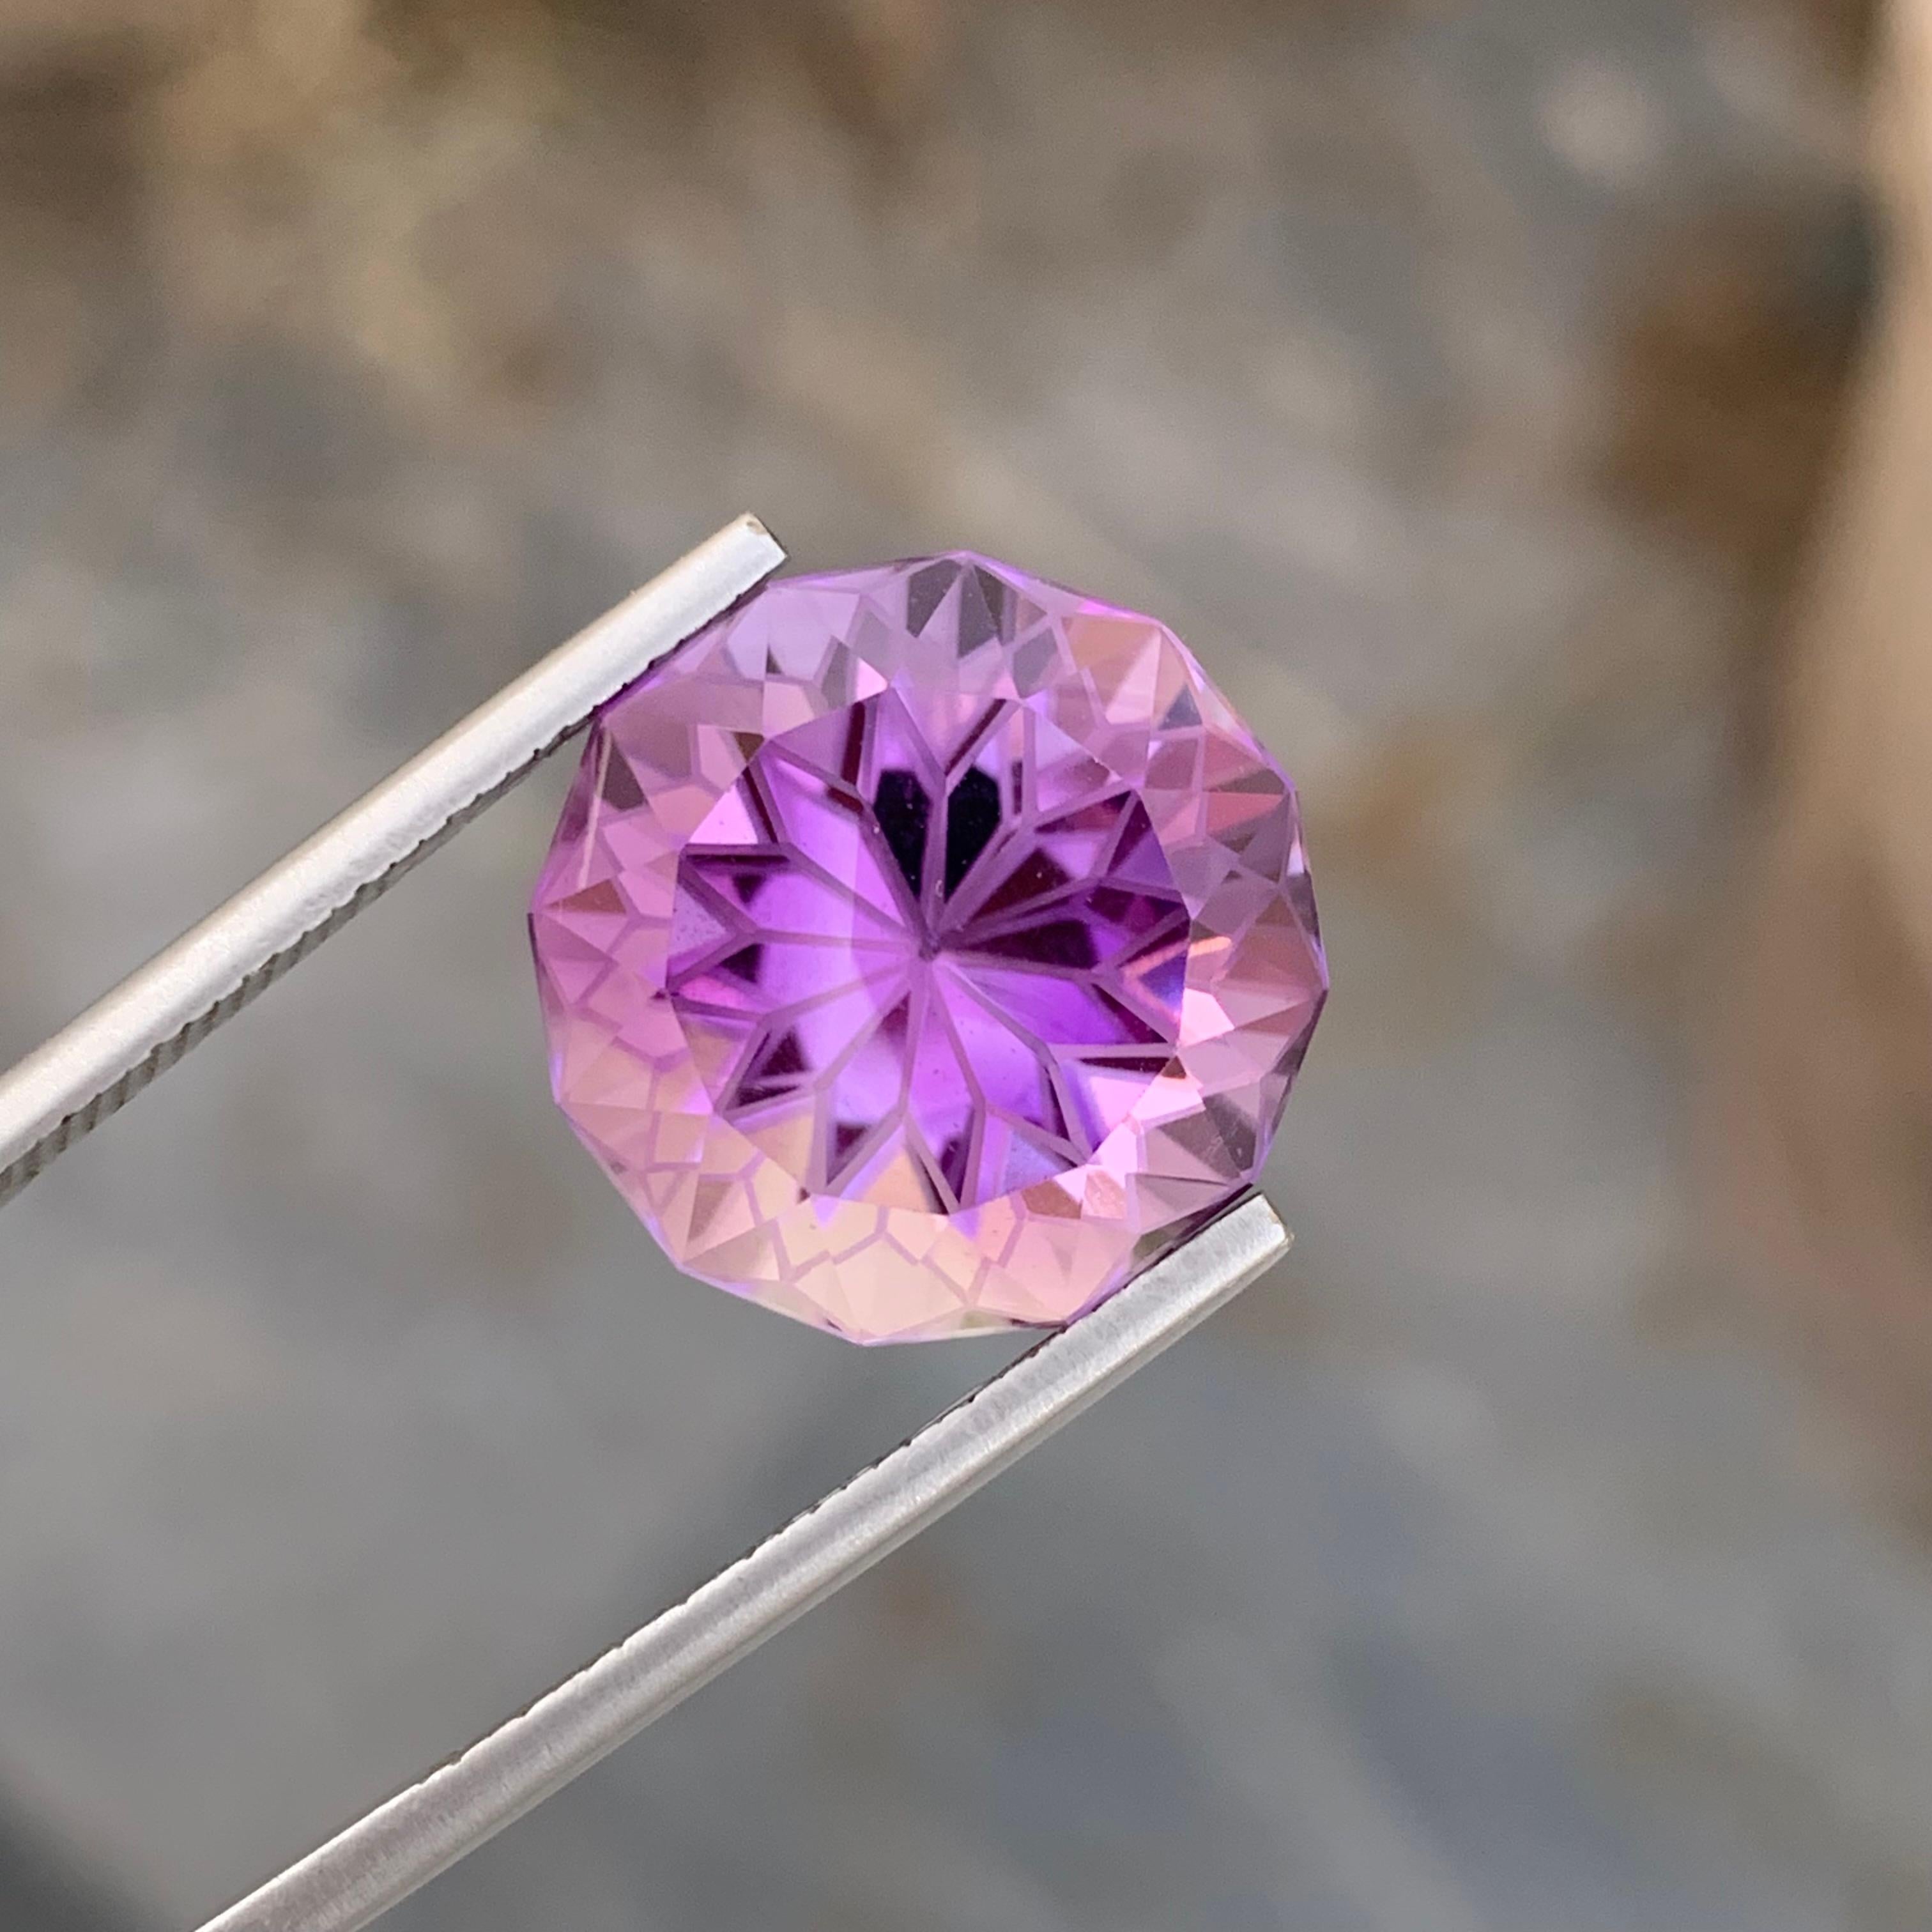 Loose Amethyst
Weight: 15.10 Carats
Dimension: 15.6 x 15.6 x 11.7 Mm
Colour: Purple
Origin: Brazil
Treatment: Non
Certificate: On Demand
Shape: Round 

Amethyst, a stunning variety of quartz known for its mesmerizing purple hue, has captivated